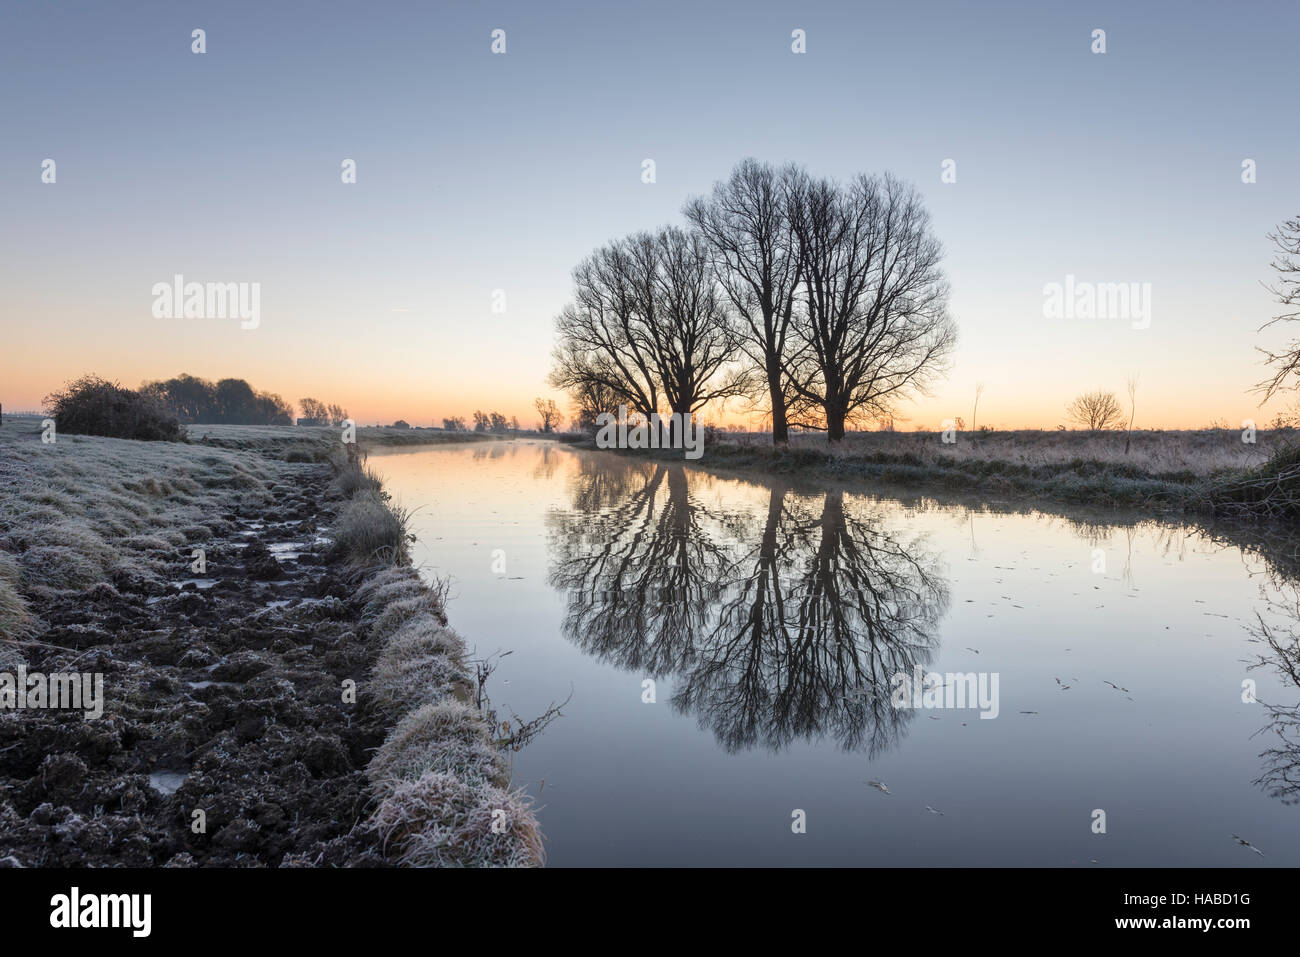 Willingham, Cambridgeshire, UK. 29th November 2016. Dawn on the Old West River in the flat landscape of the Cambridgeshire Fens where temperatures fell overnight to minus 4 degrees centigrade on one of the coldest nights of the winter so far this year. Further freezing conditions are forecast for the next few days. Credit Julian Eales/Alamy Live News Stock Photo